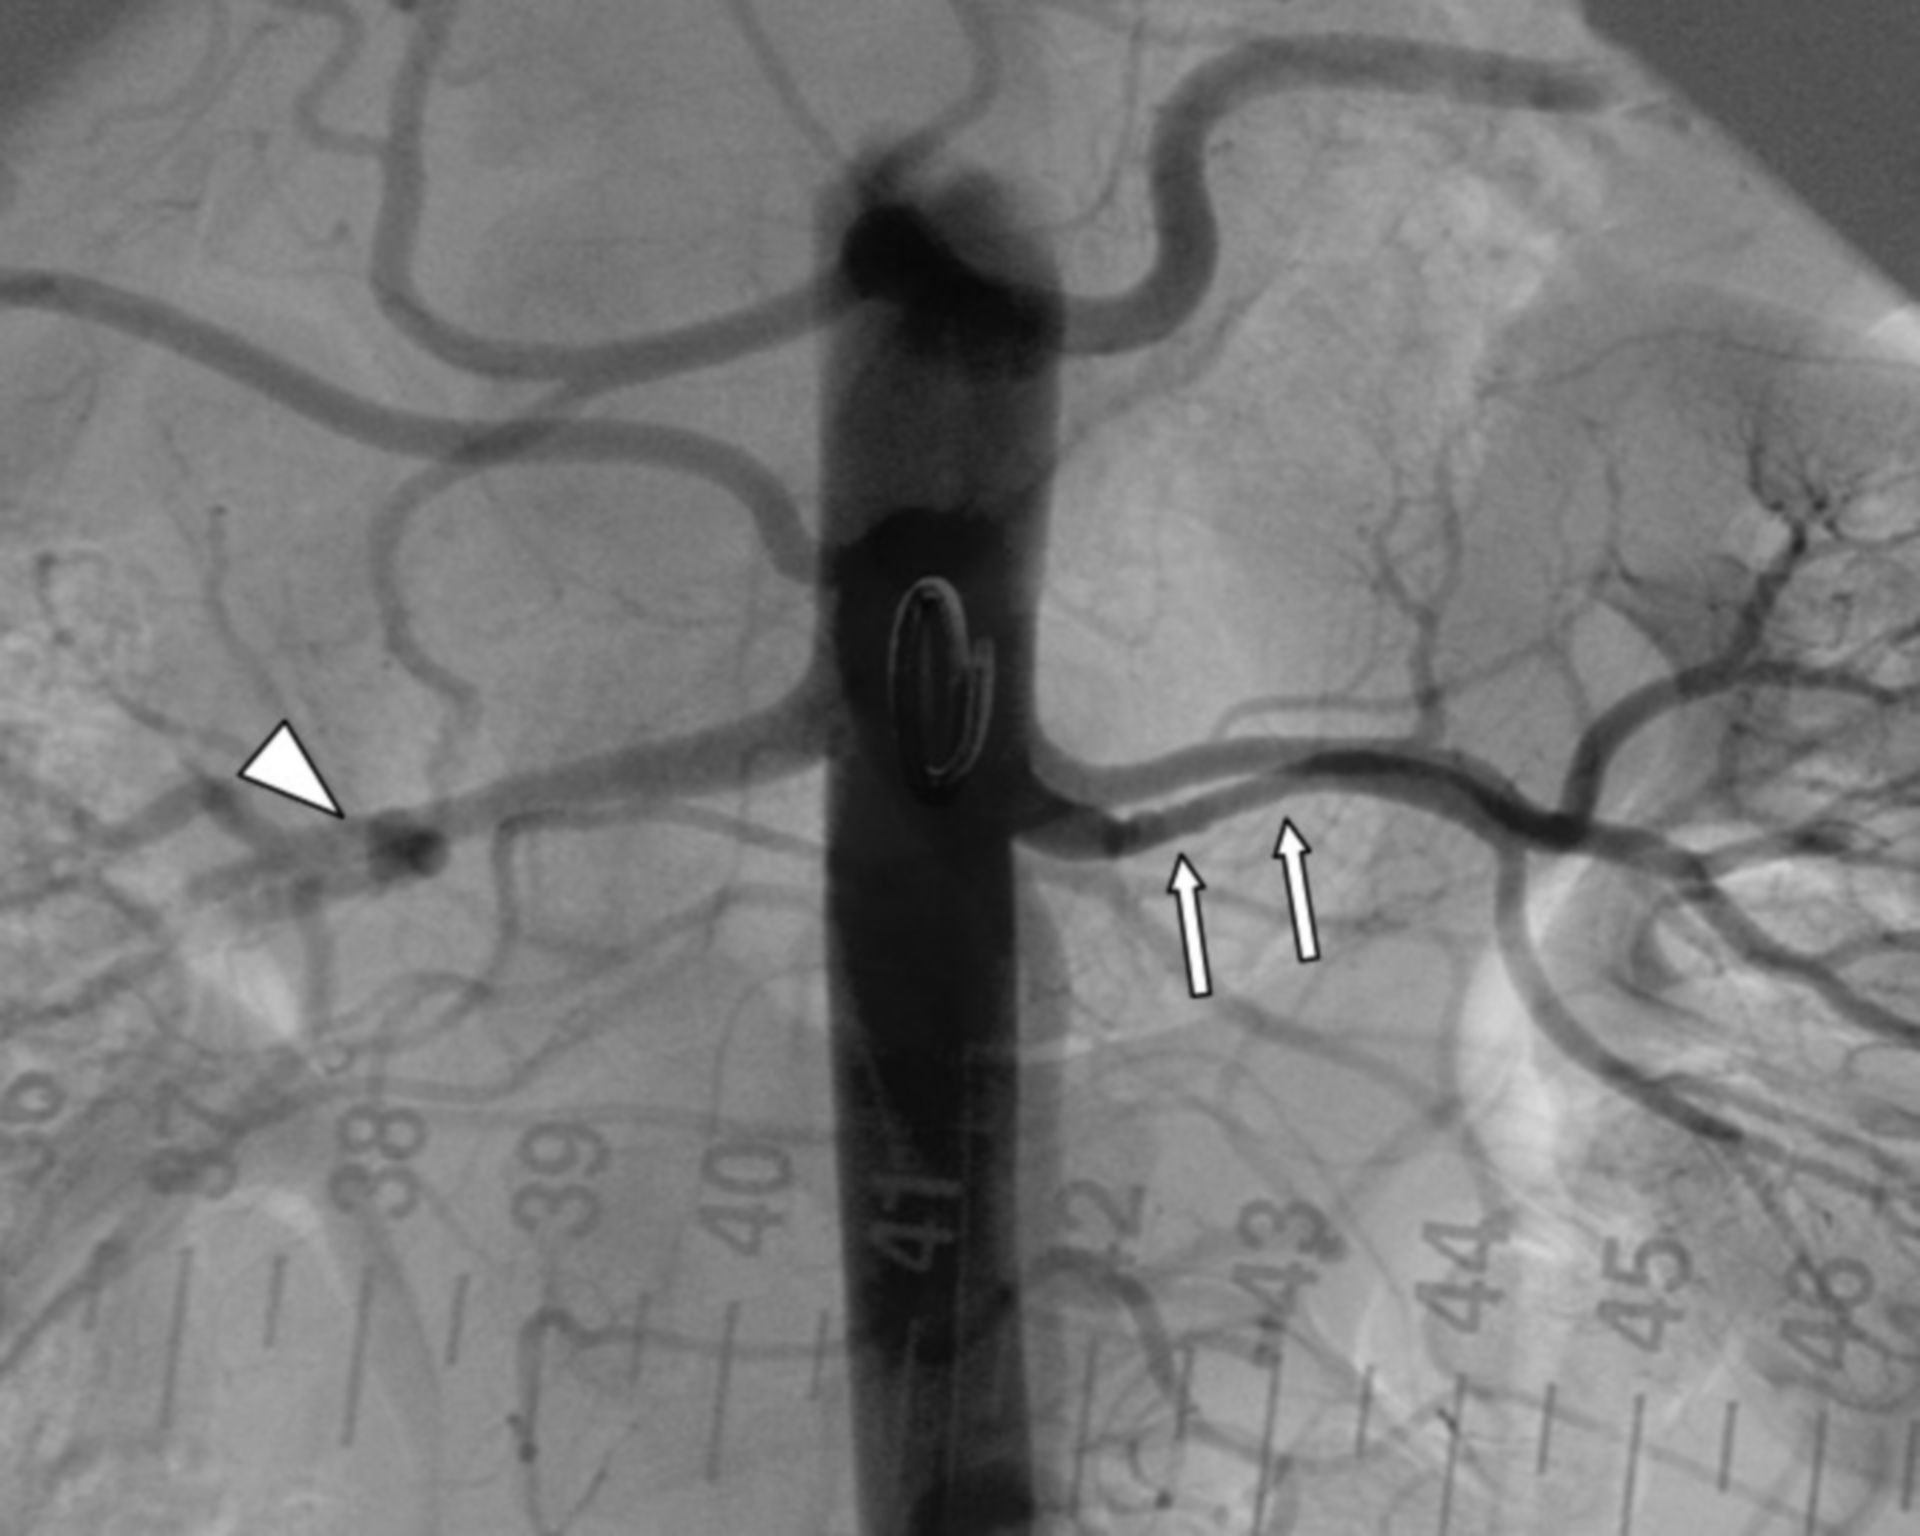 Angiography of a renal artery stenosis